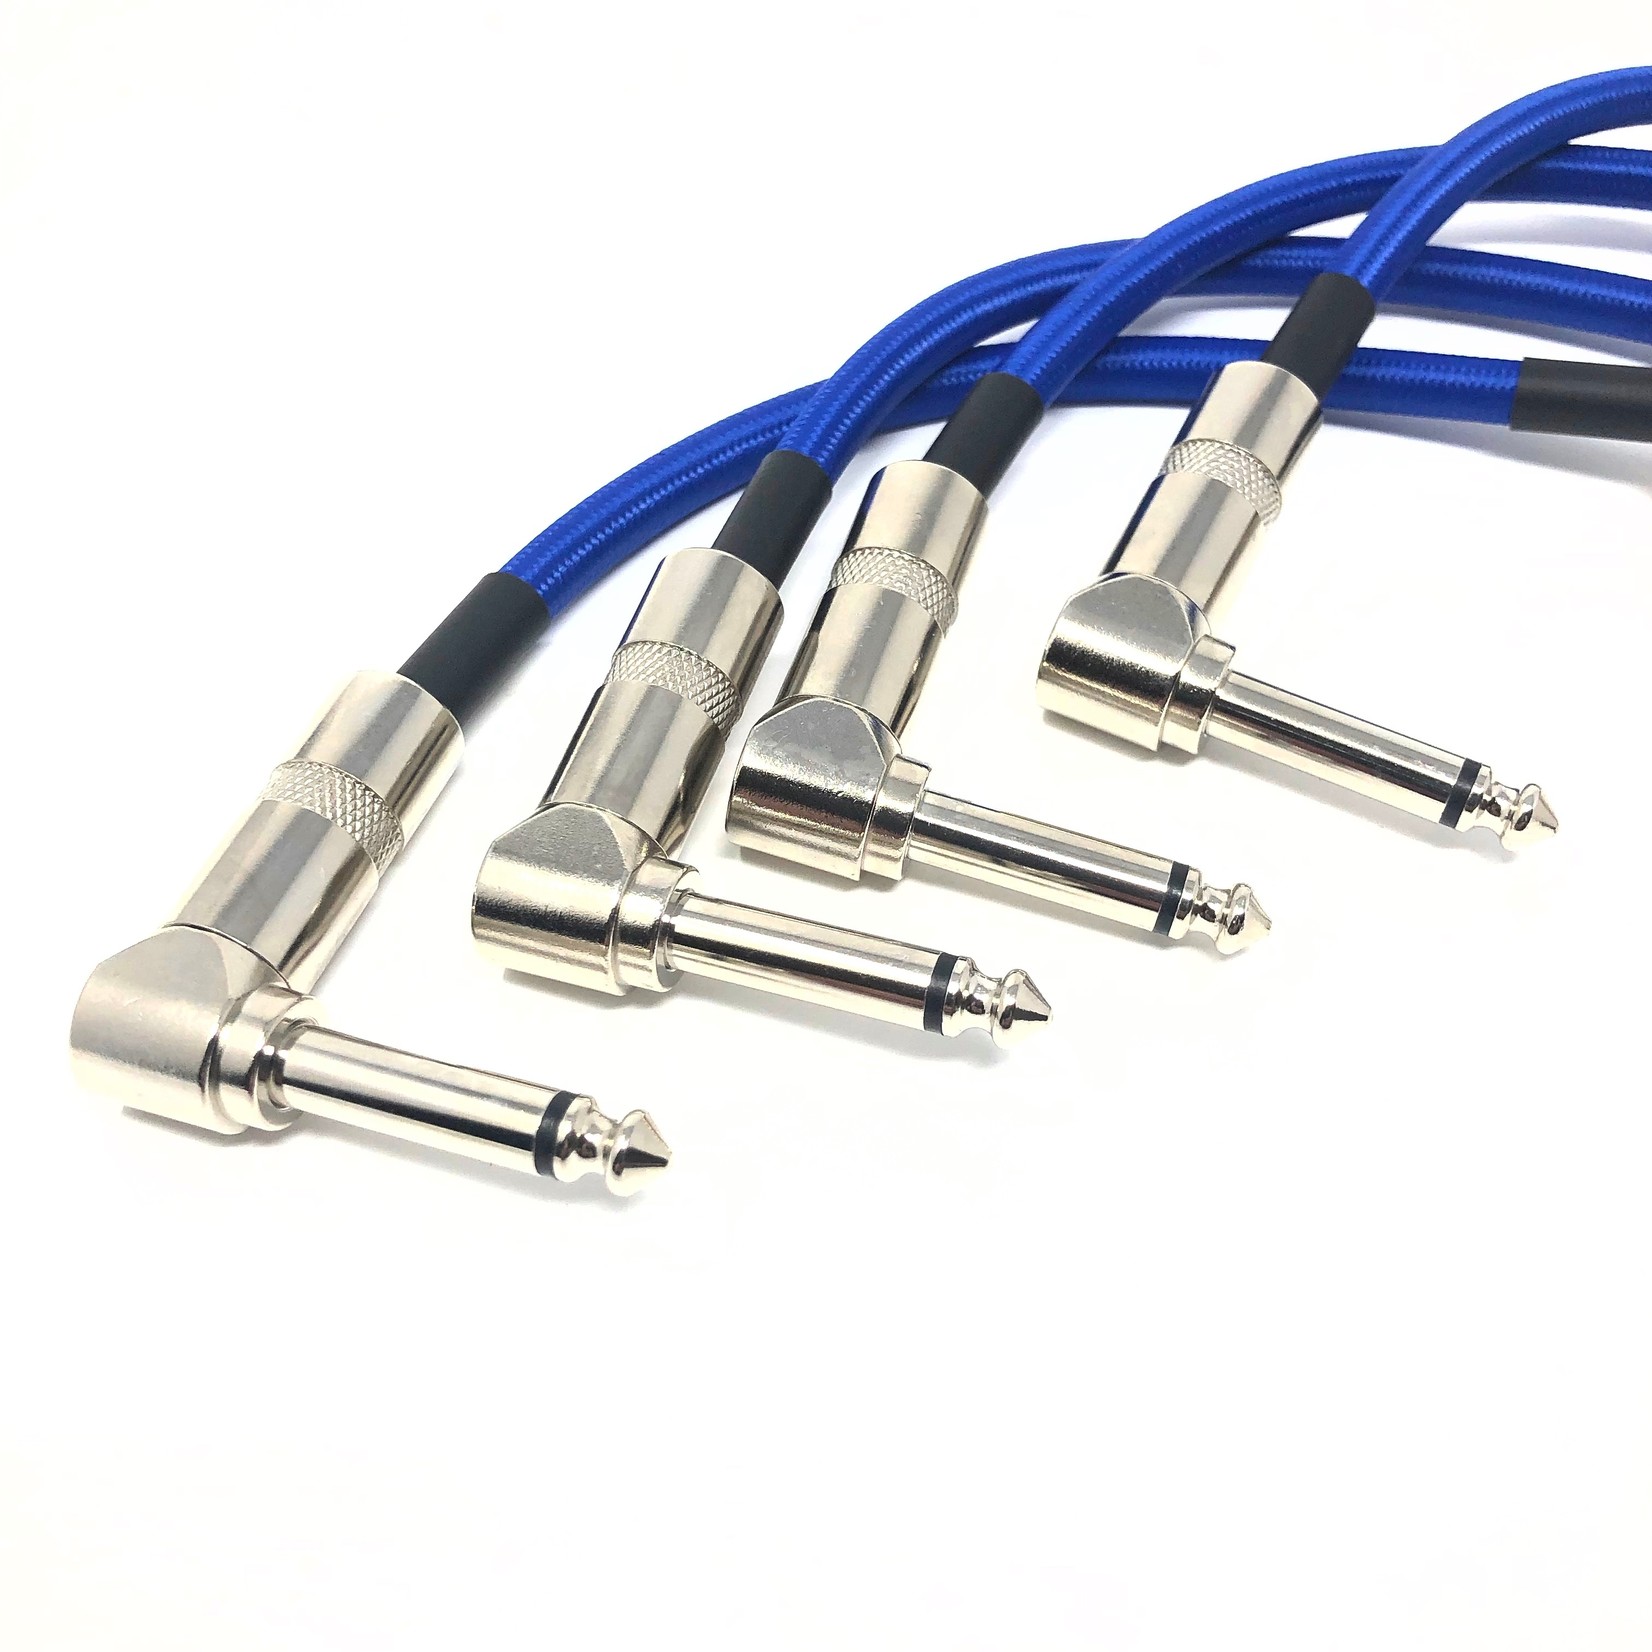 Strukture Set of four (4) Strukture 6" right-angle patch cables - Blue Woven